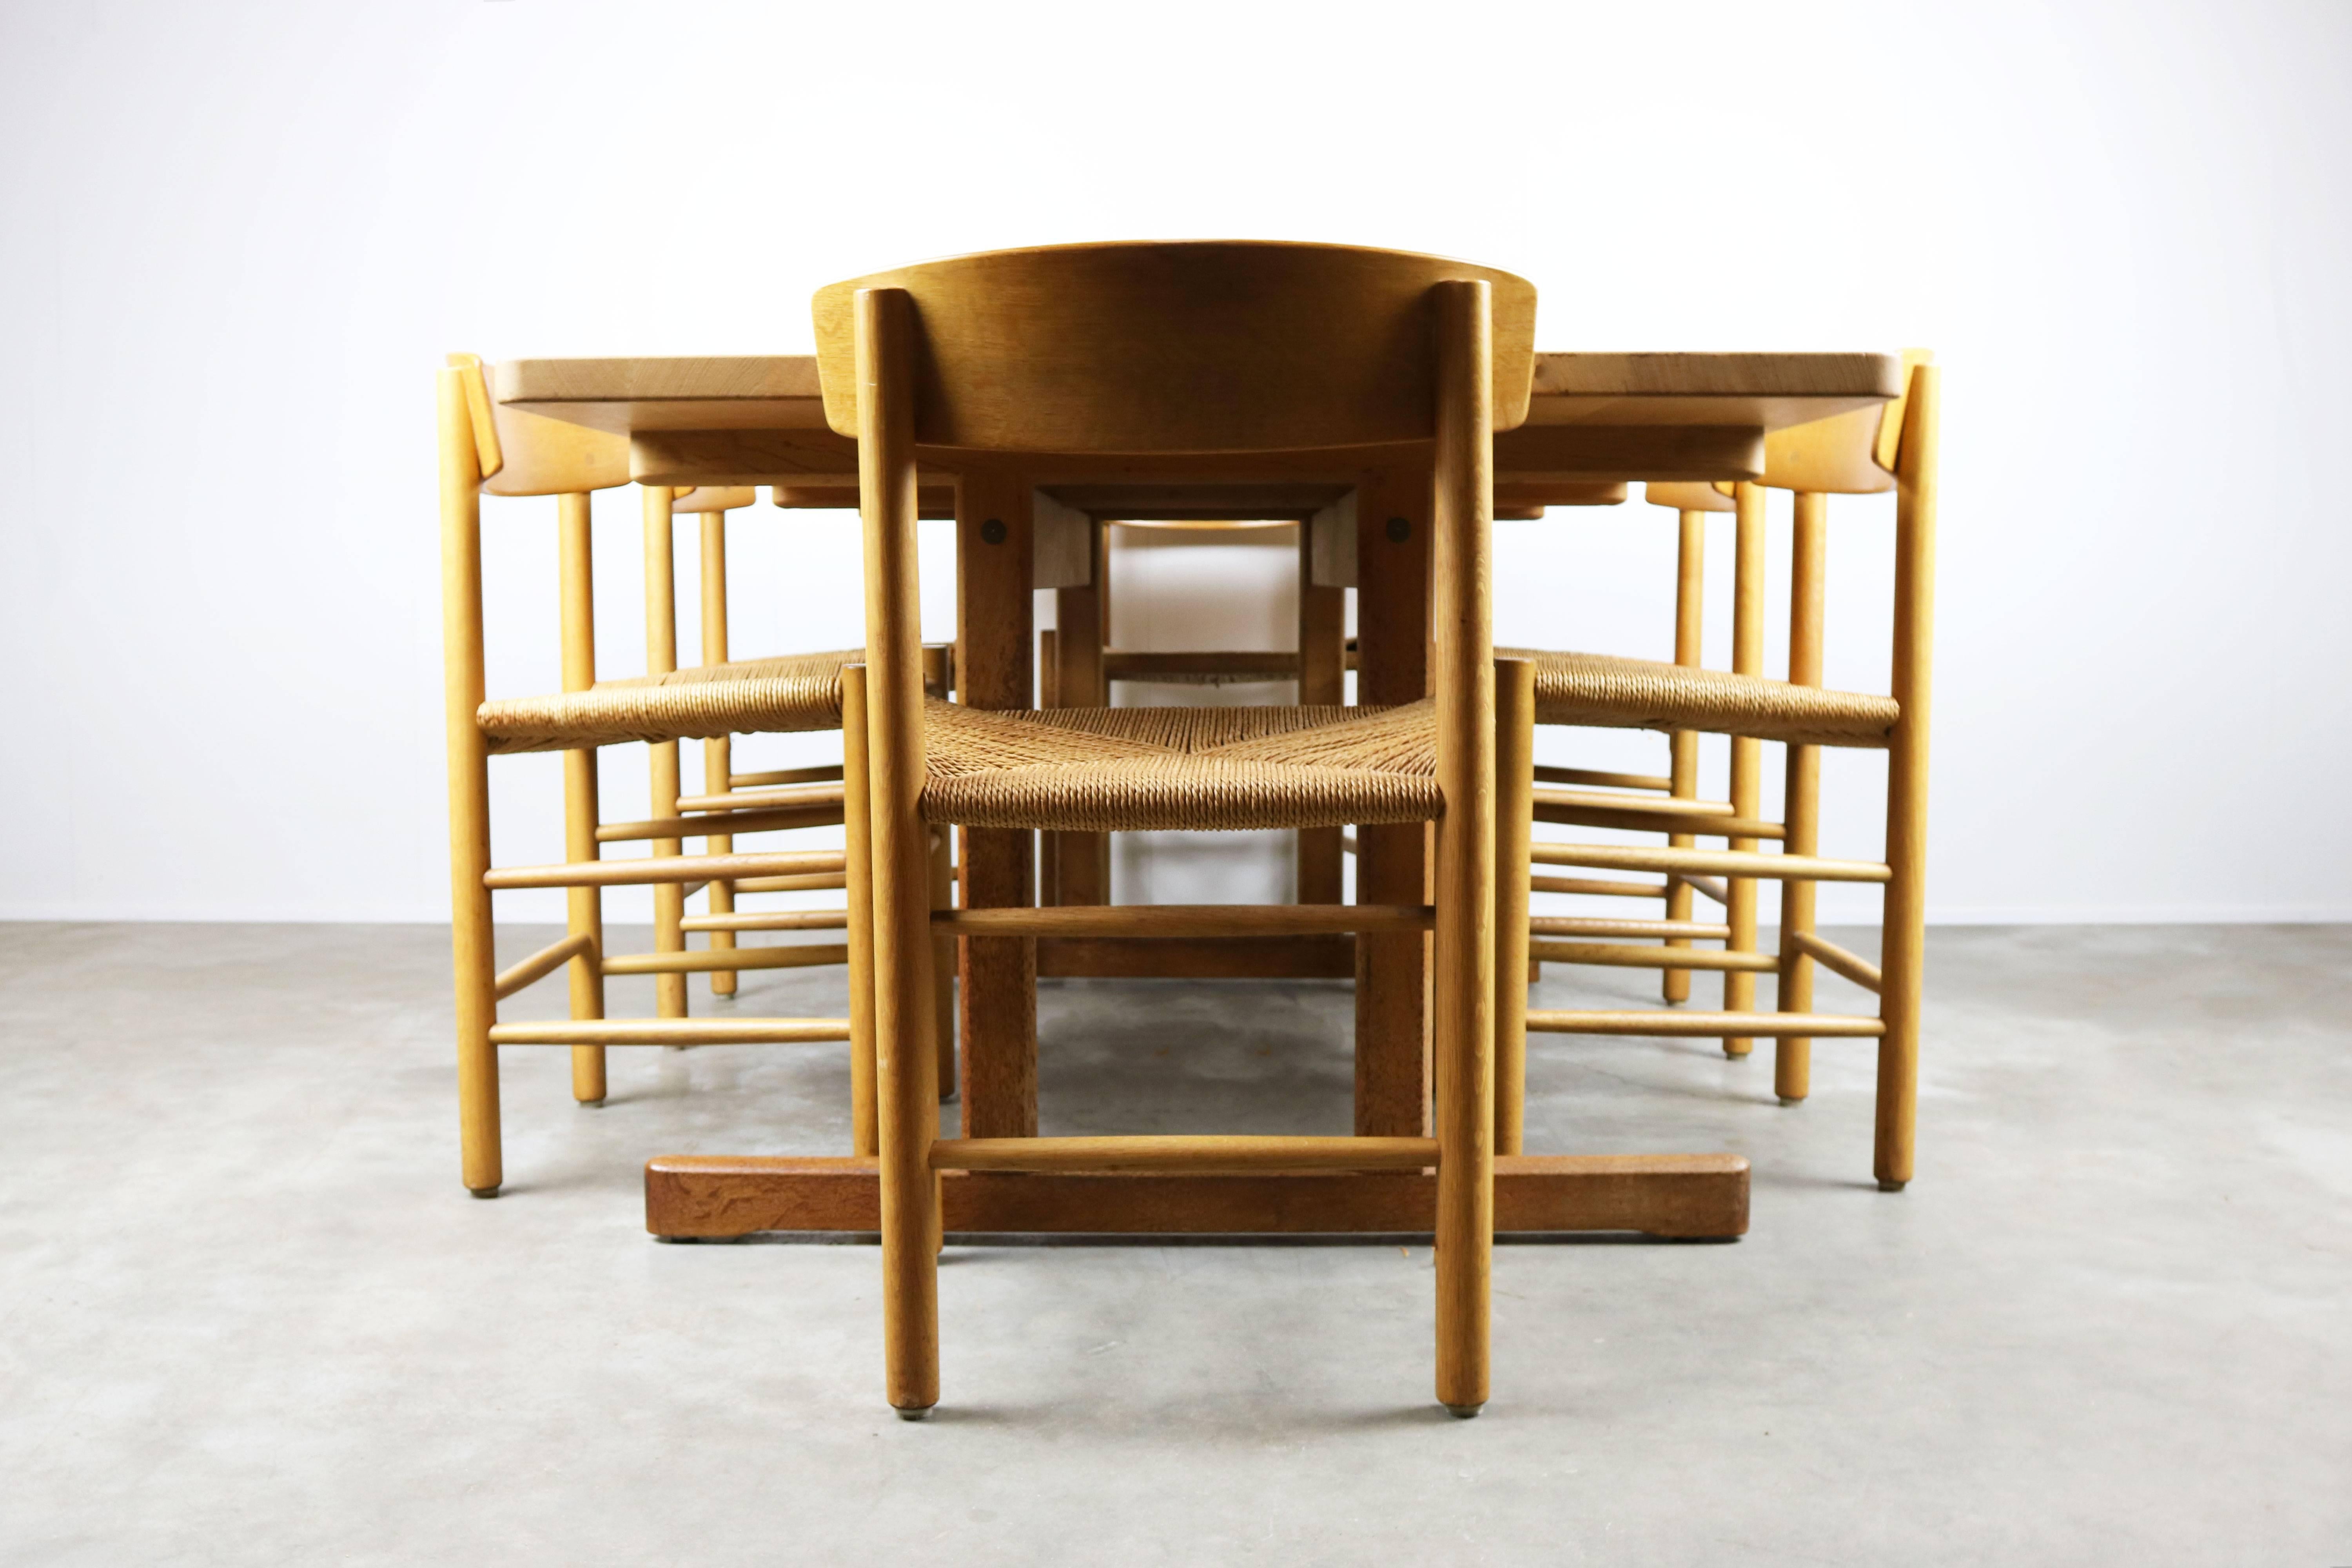 Mid-20th Century Danish Dining Room Set J39 Chairs & 6286 Table by Borge Mogensen for Fredericia